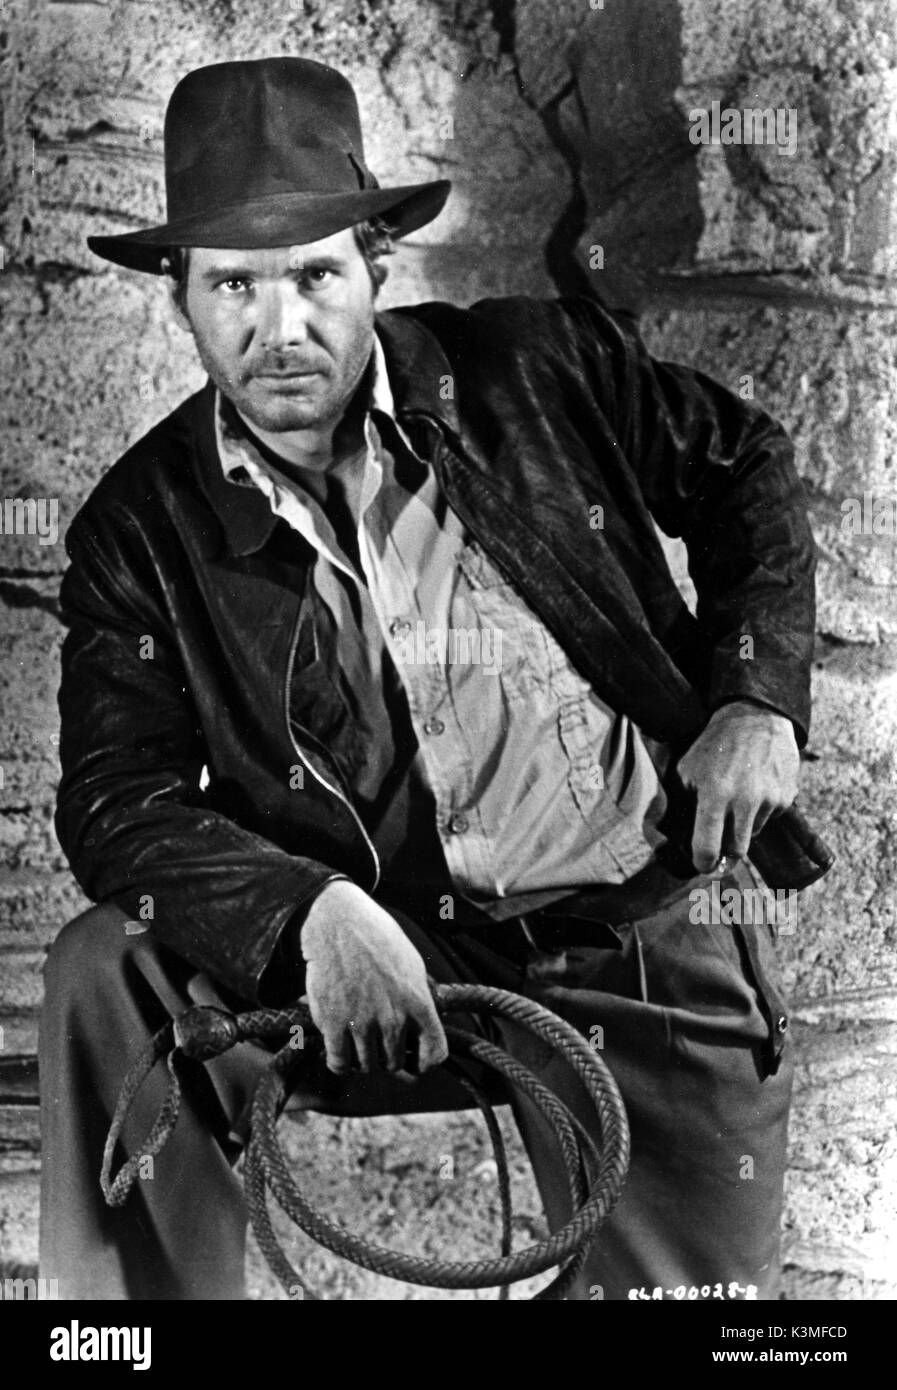 RAIDERS OF THE LOST ARK [US 1981] HARRISON FORD as Indiana Jones     Date: 1981 Stock Photo